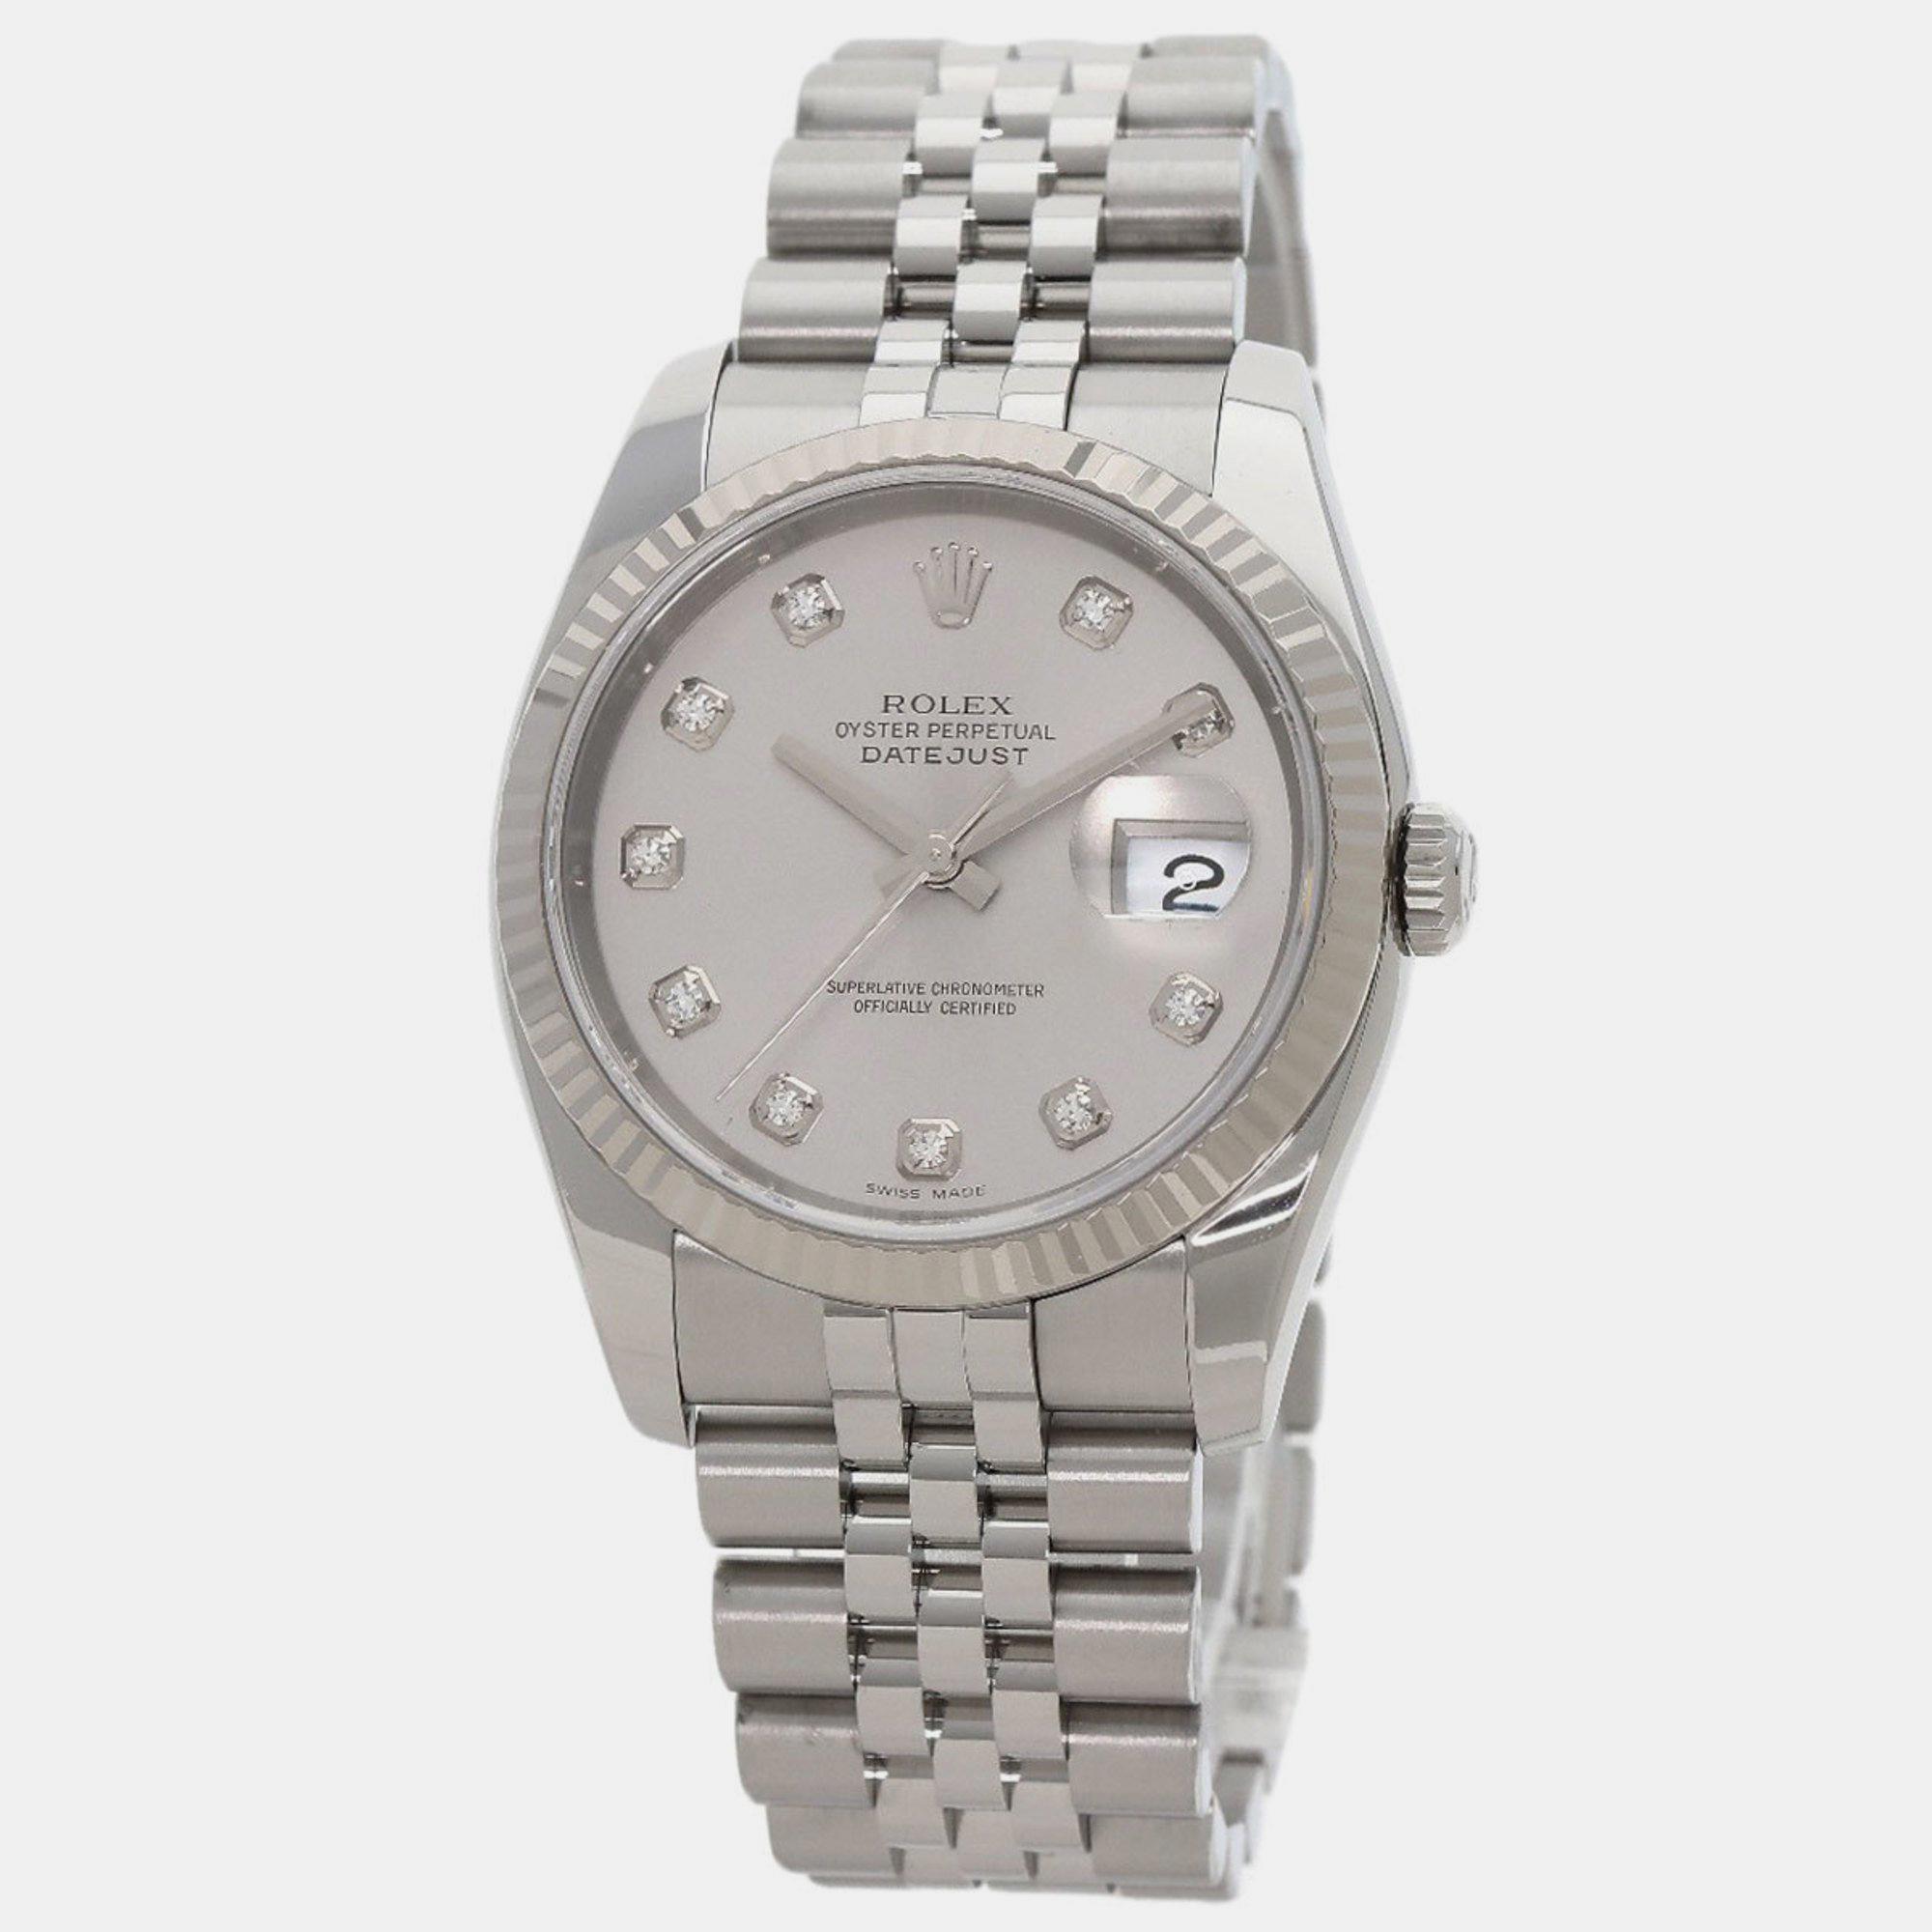 Rolex silver 18k white gold stainless steel datejust 116234 automatic men's wristwatch 46 mm